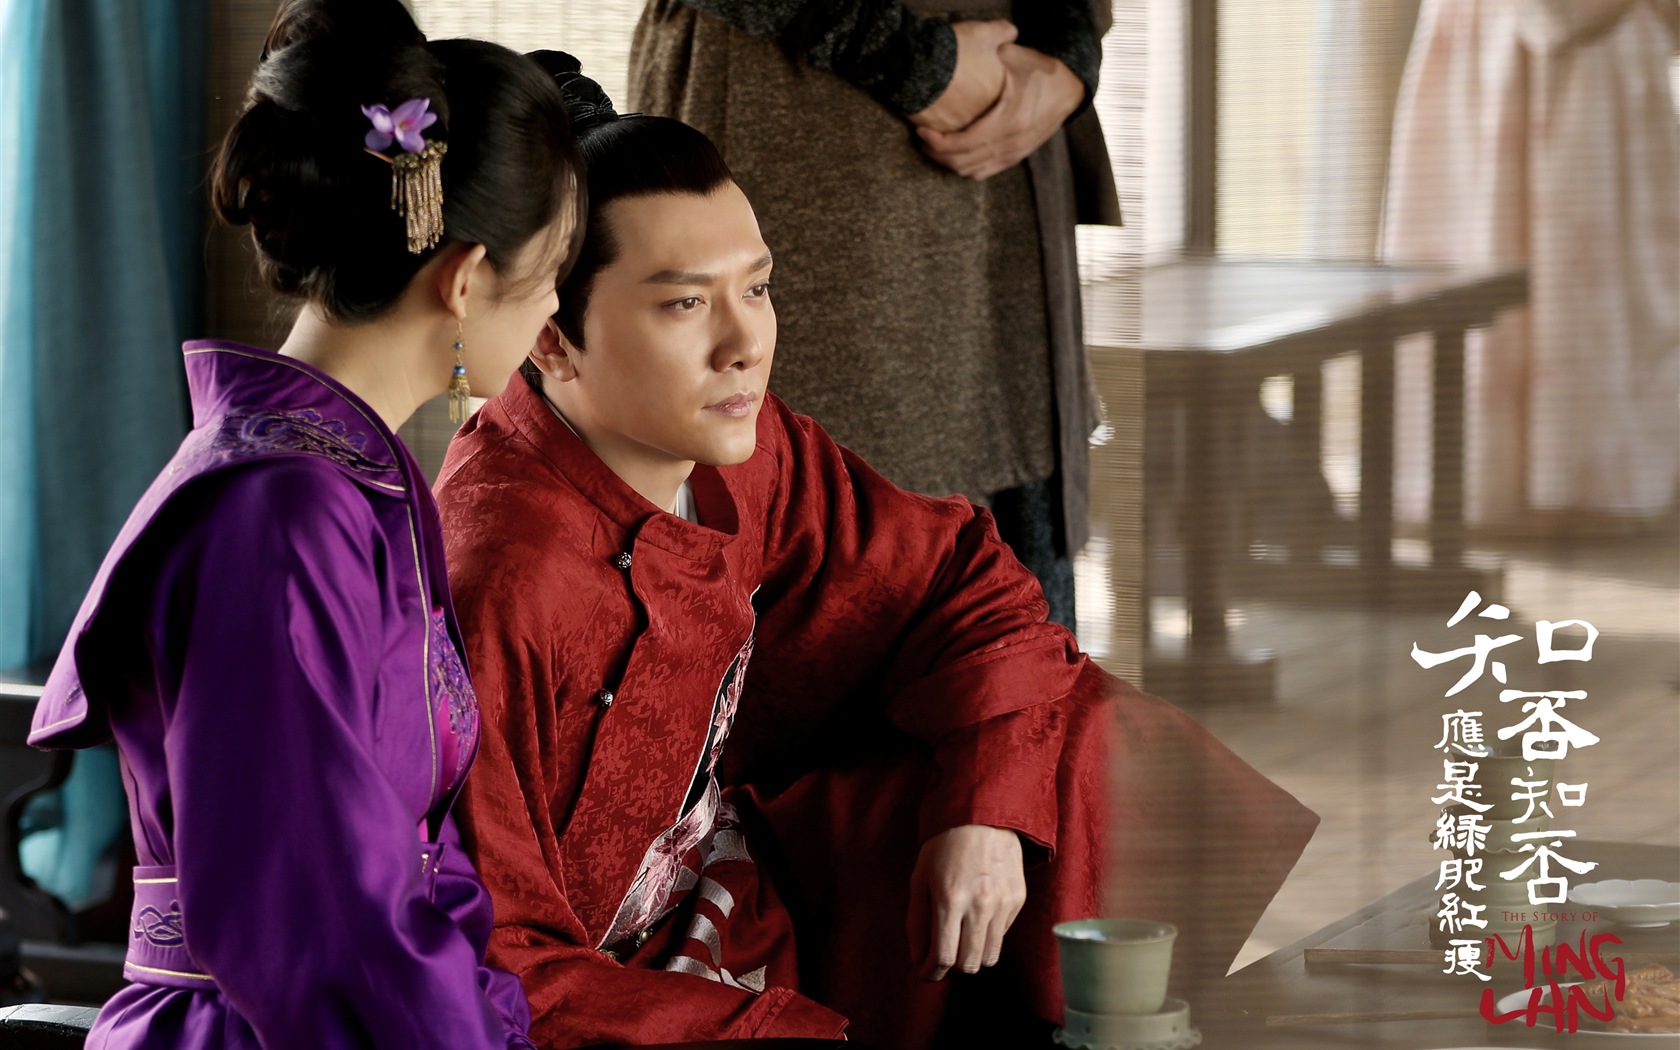 The Story Of MingLan, TV series HD wallpapers #42 - 1680x1050